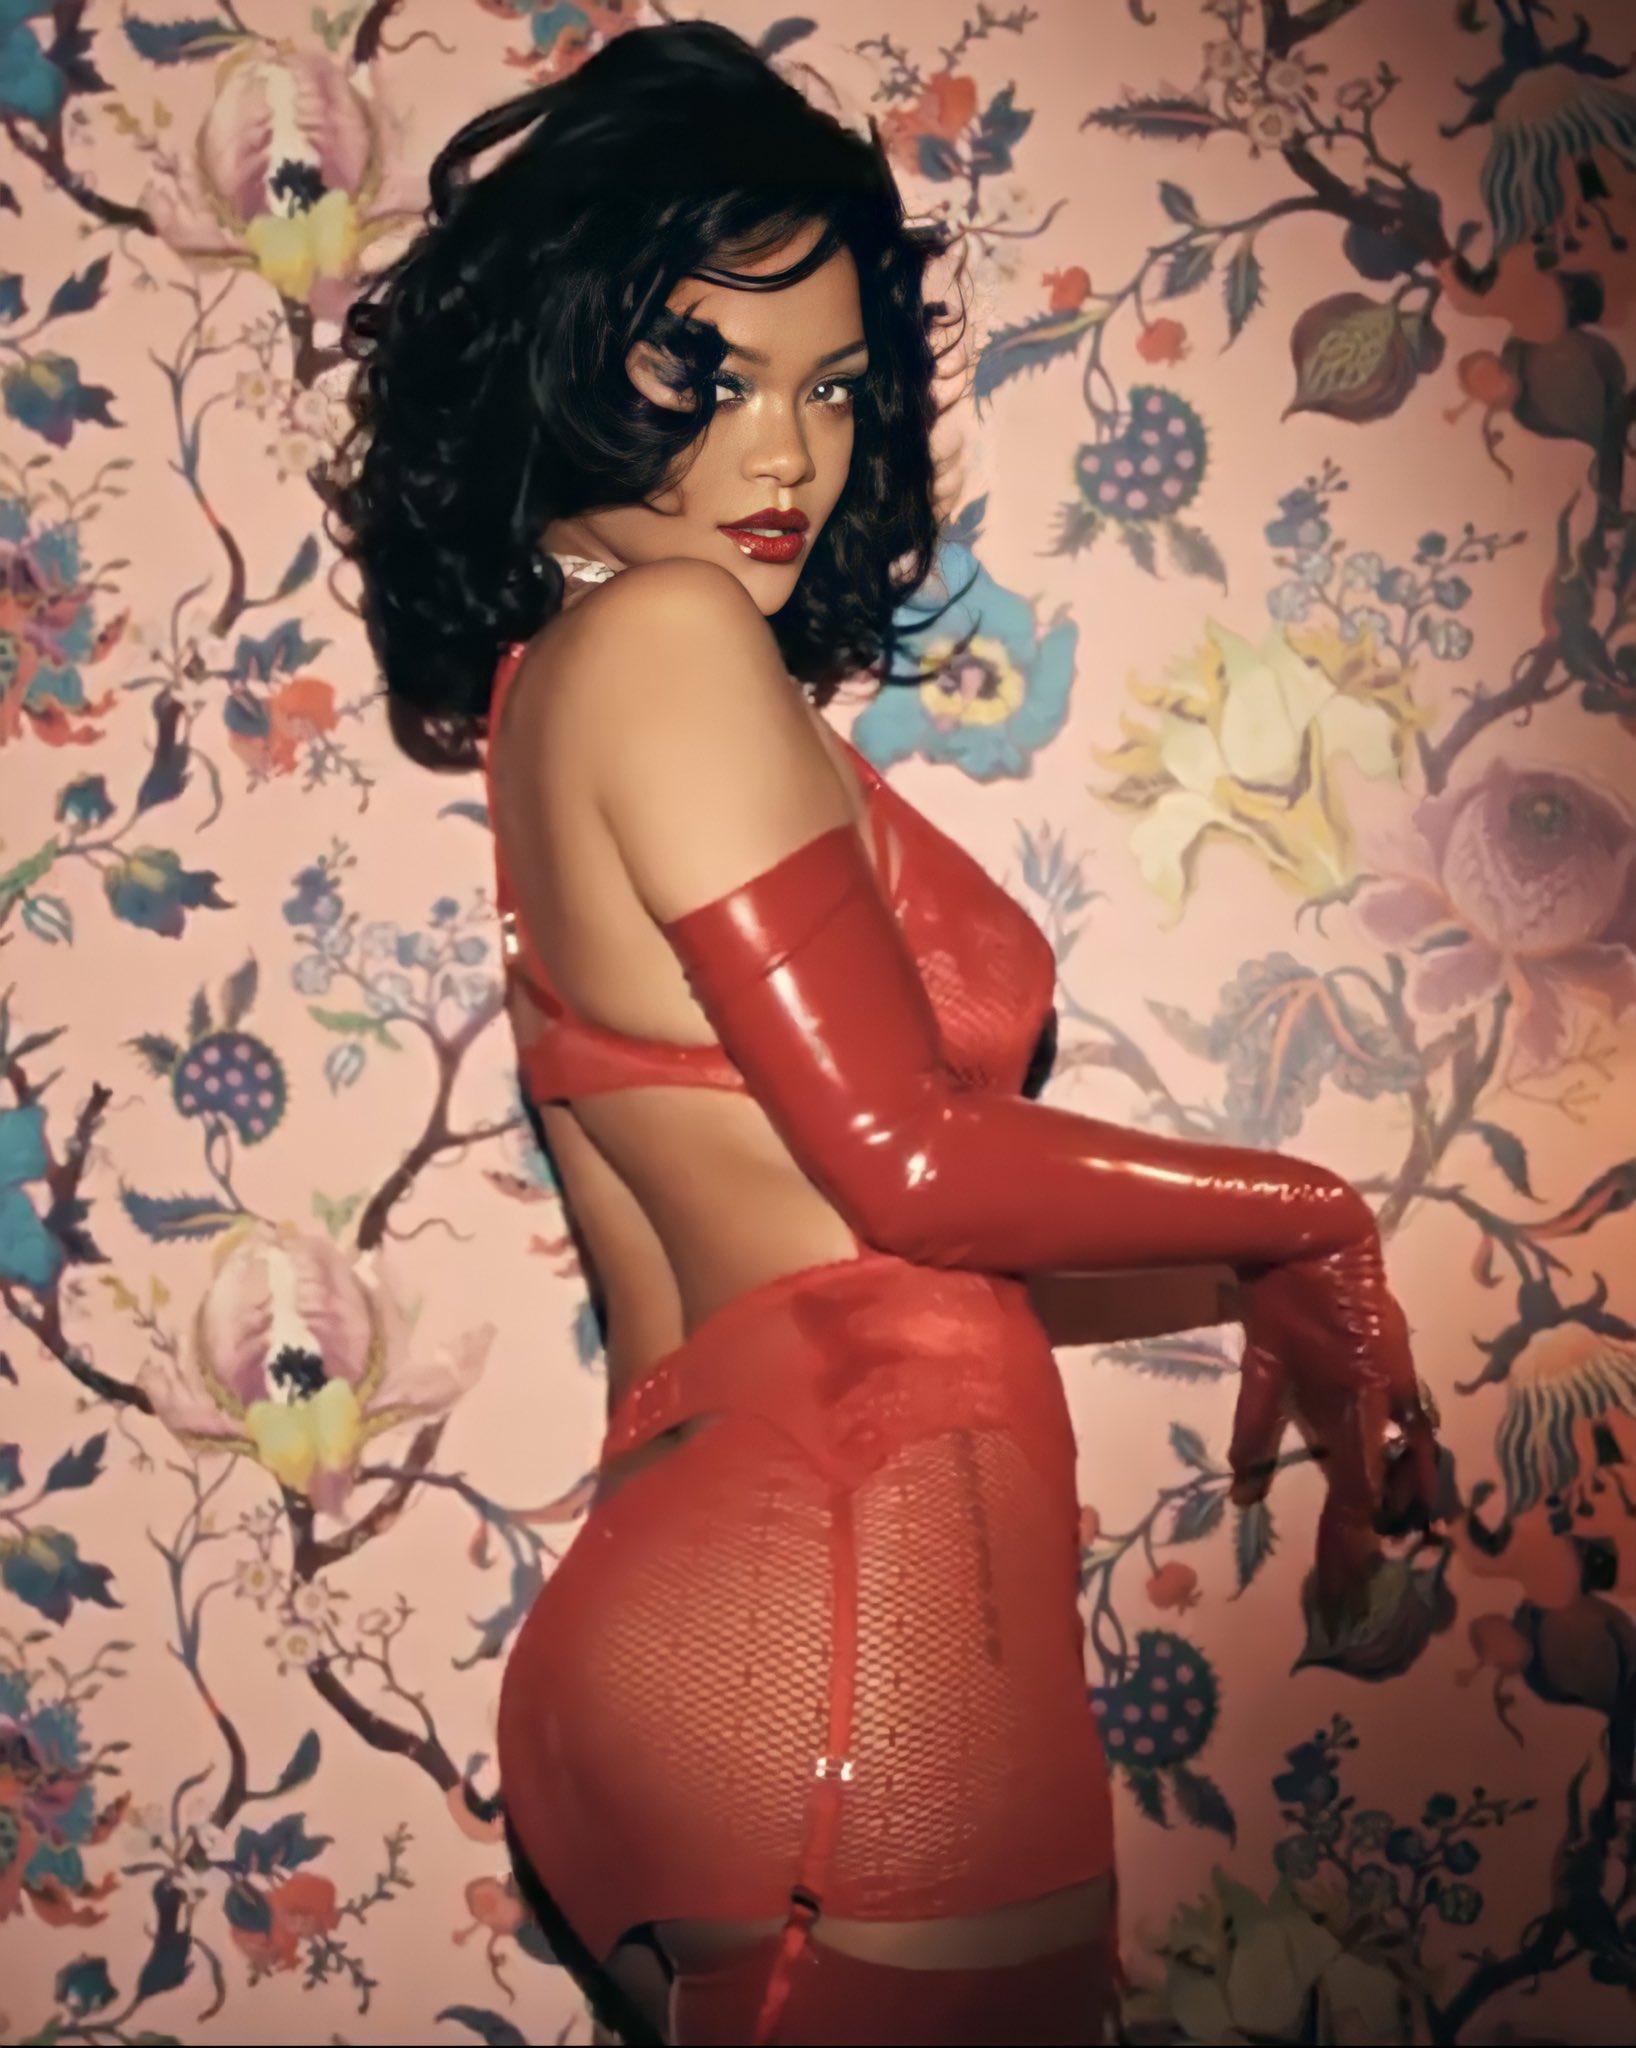 Photos n°7 : Rihanna Wants To Be Your Valentine!